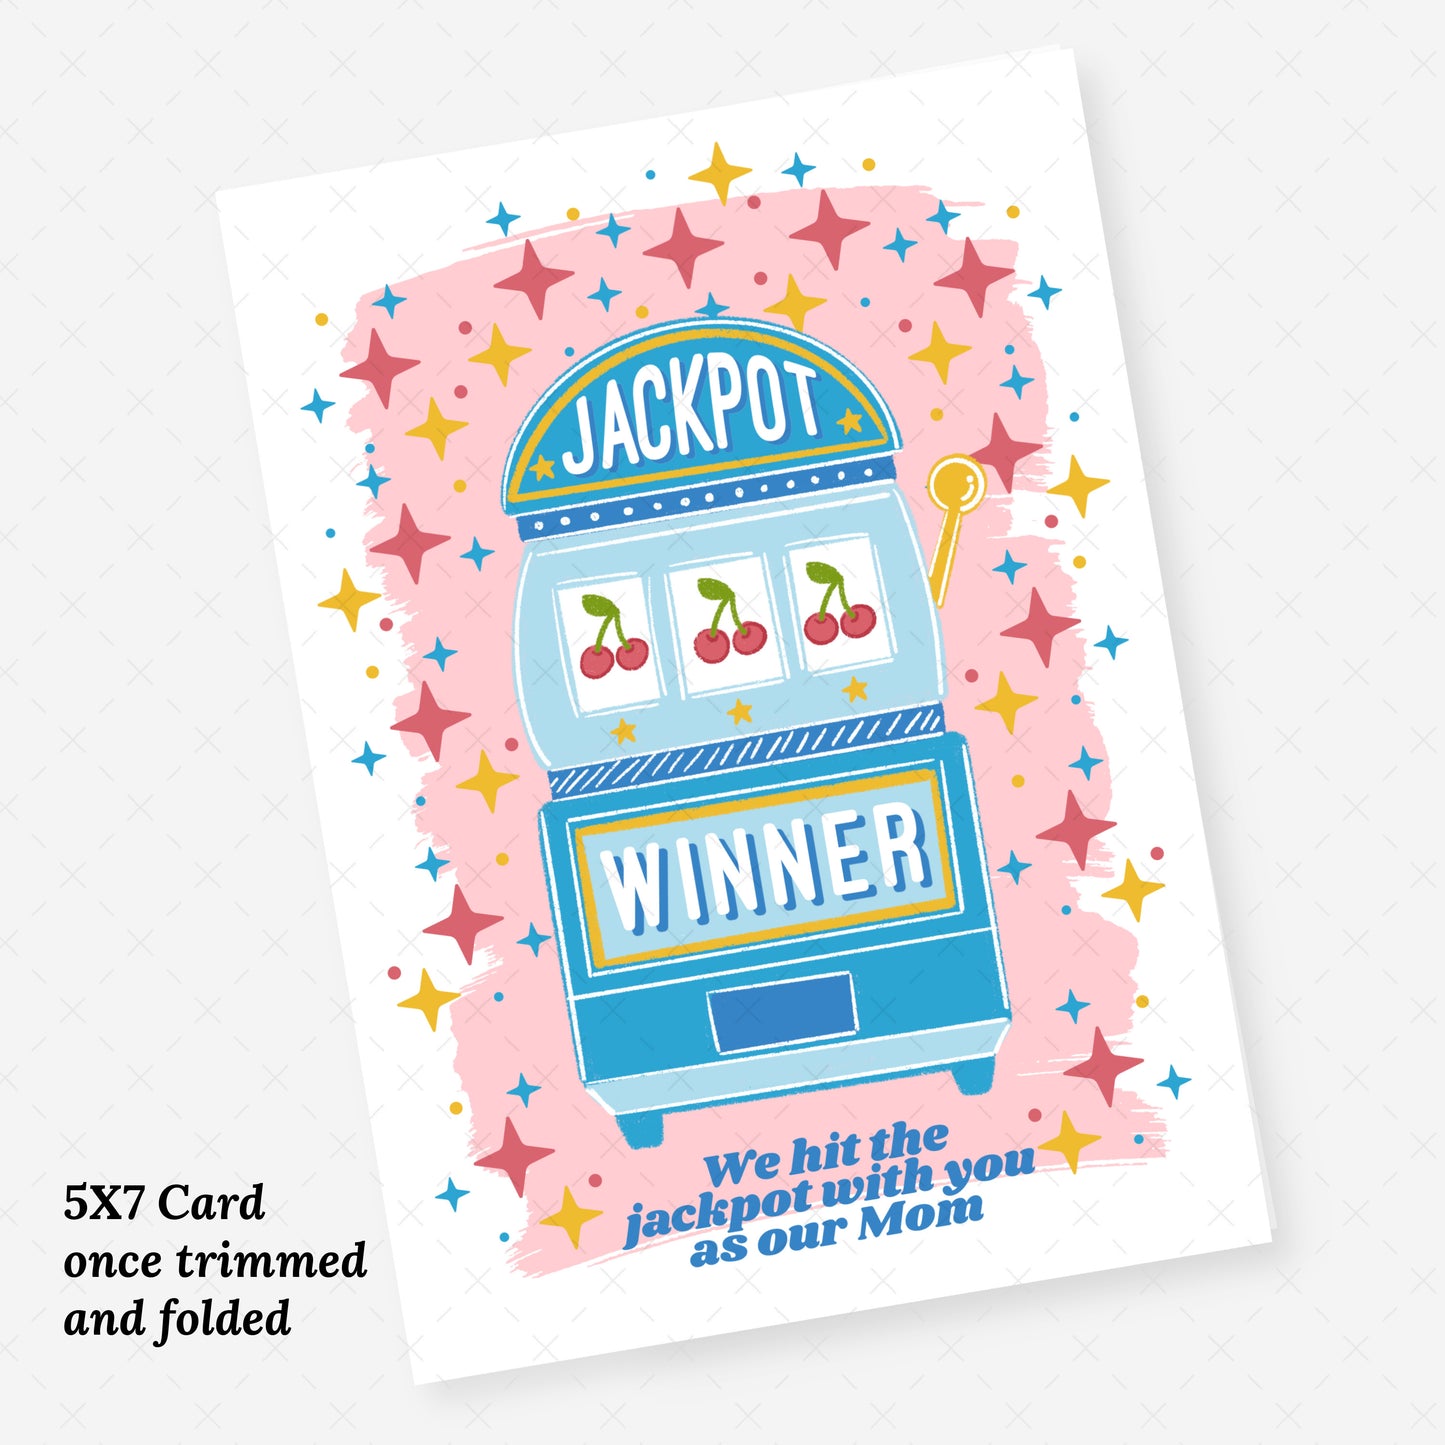 We Hit The Jackpot | Happy Mother's Day Printable Card | HMD Digital Gift Card